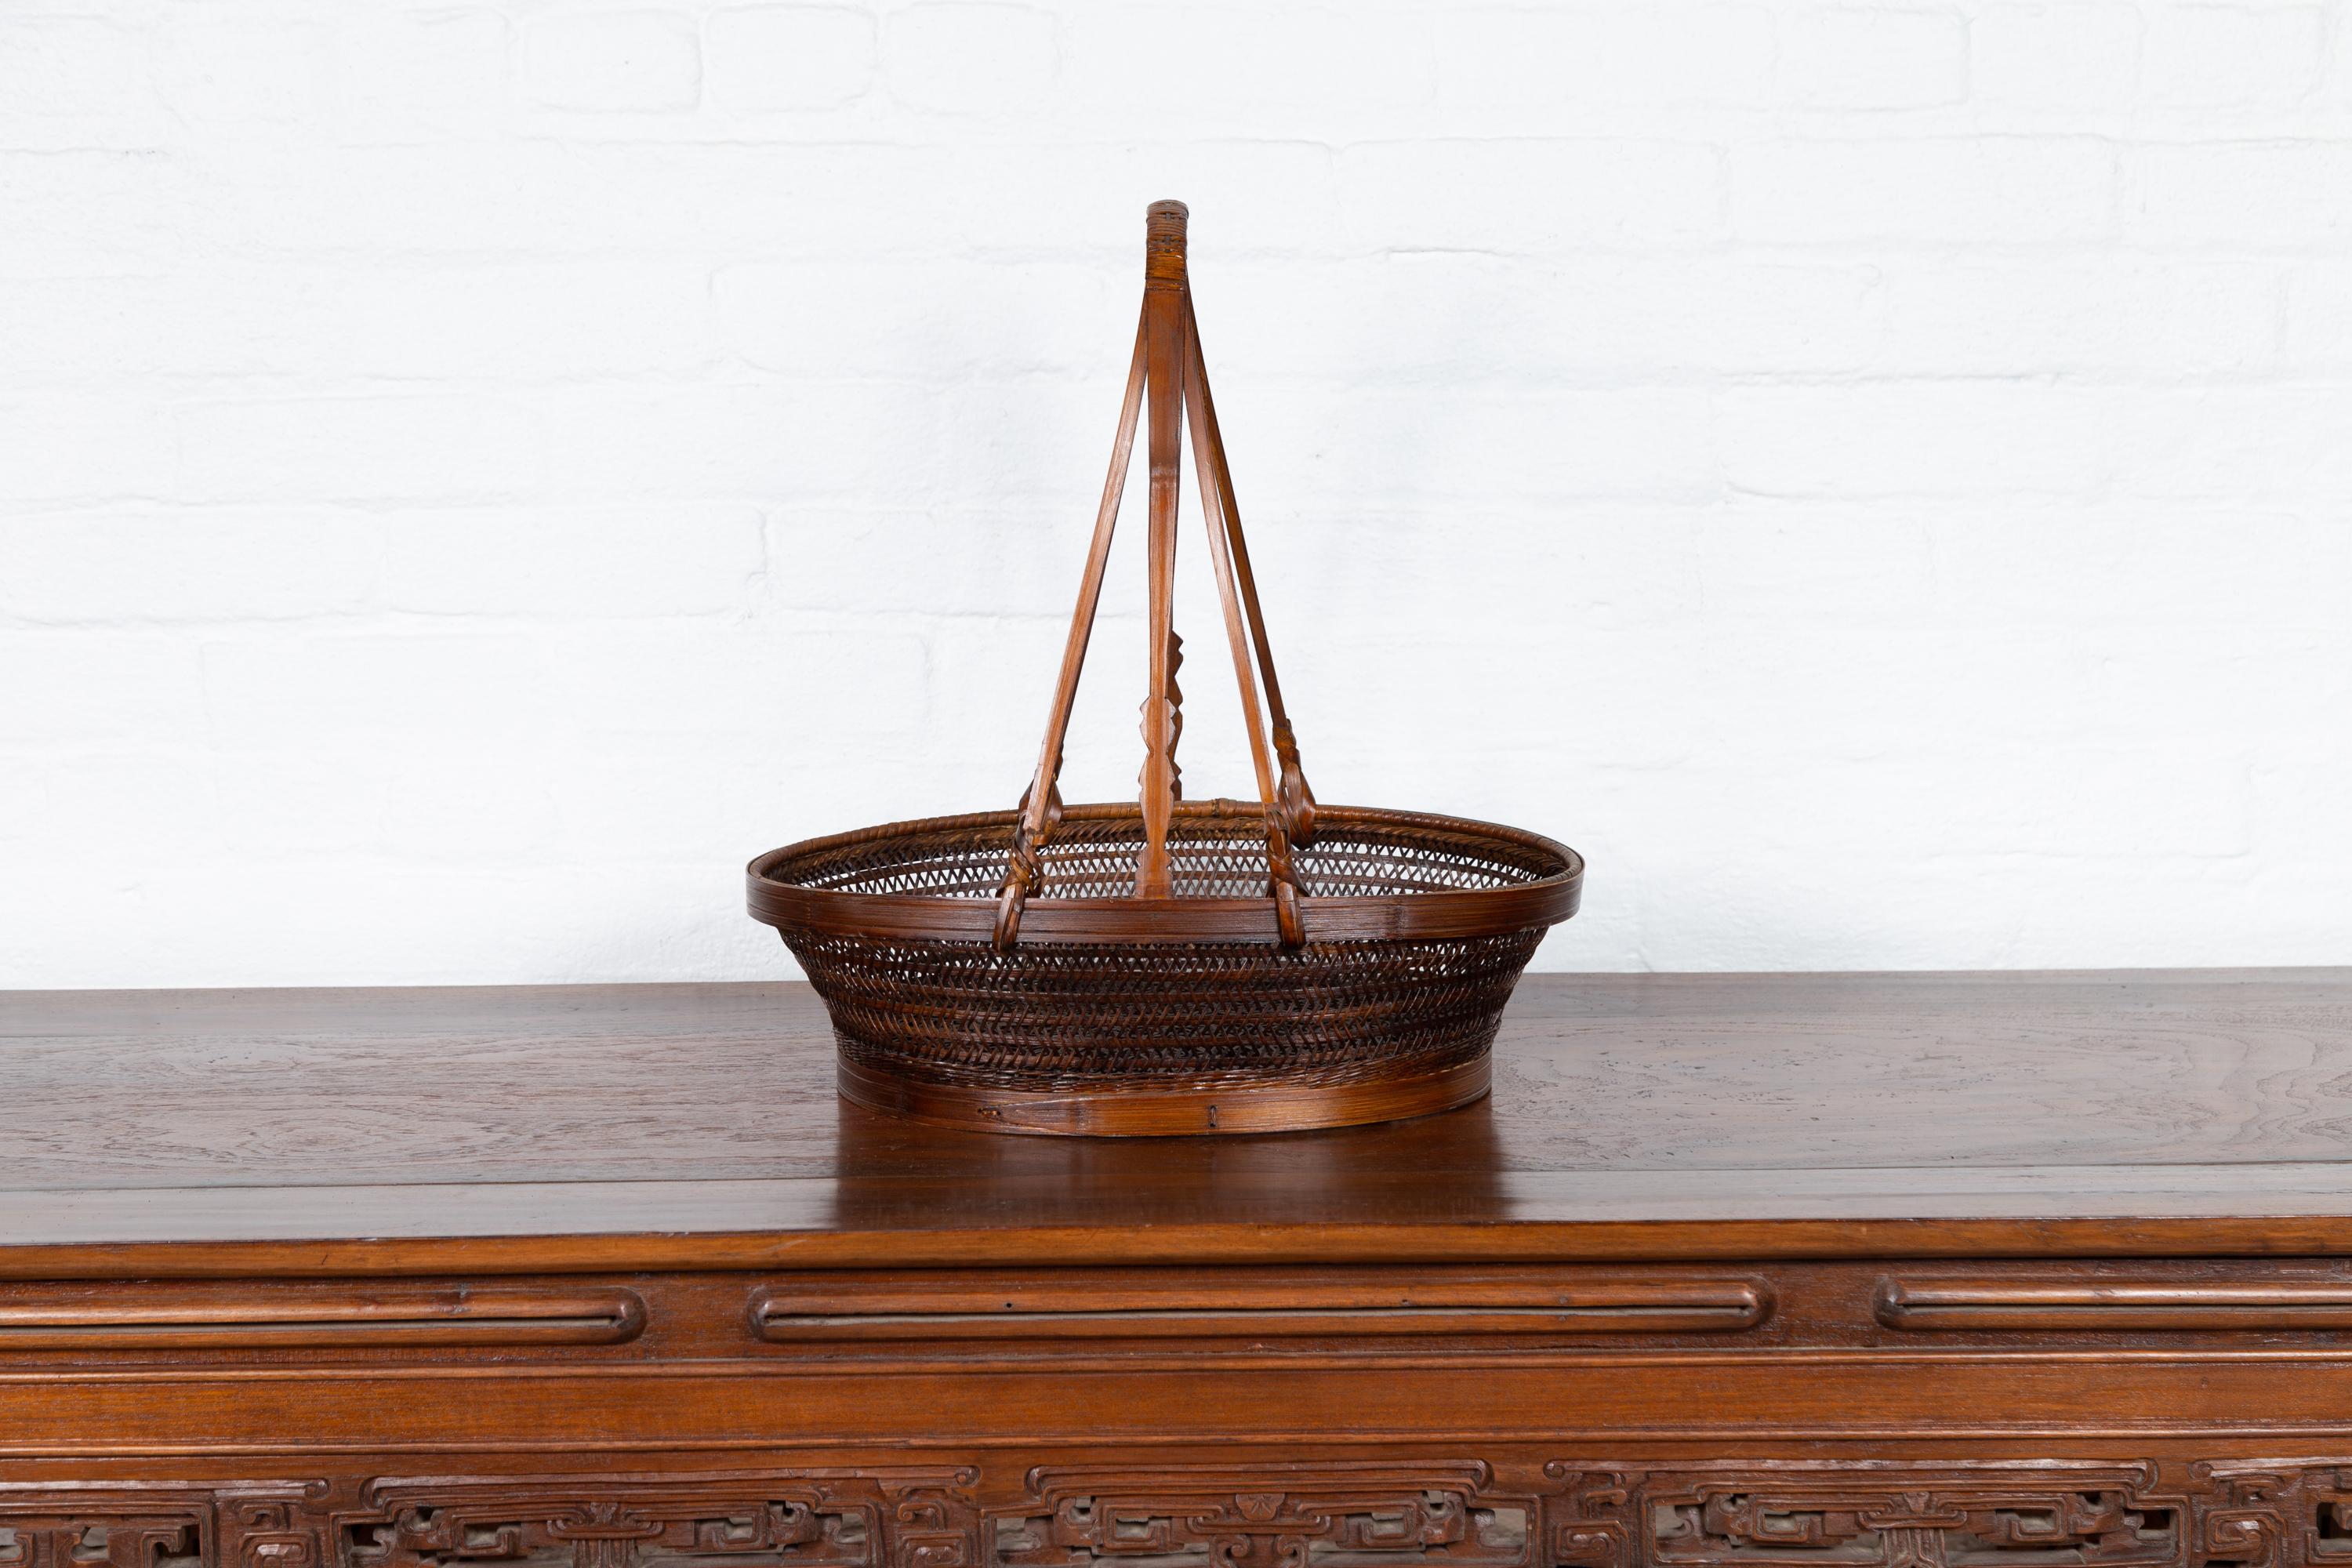 A Chinese vintage woven rattan carrying basket from the mid-20th century, with large handle. Born in China during the midcentury period, this charming carrying basket features an oval body made of woven rattan with wooden frame, topped with a large